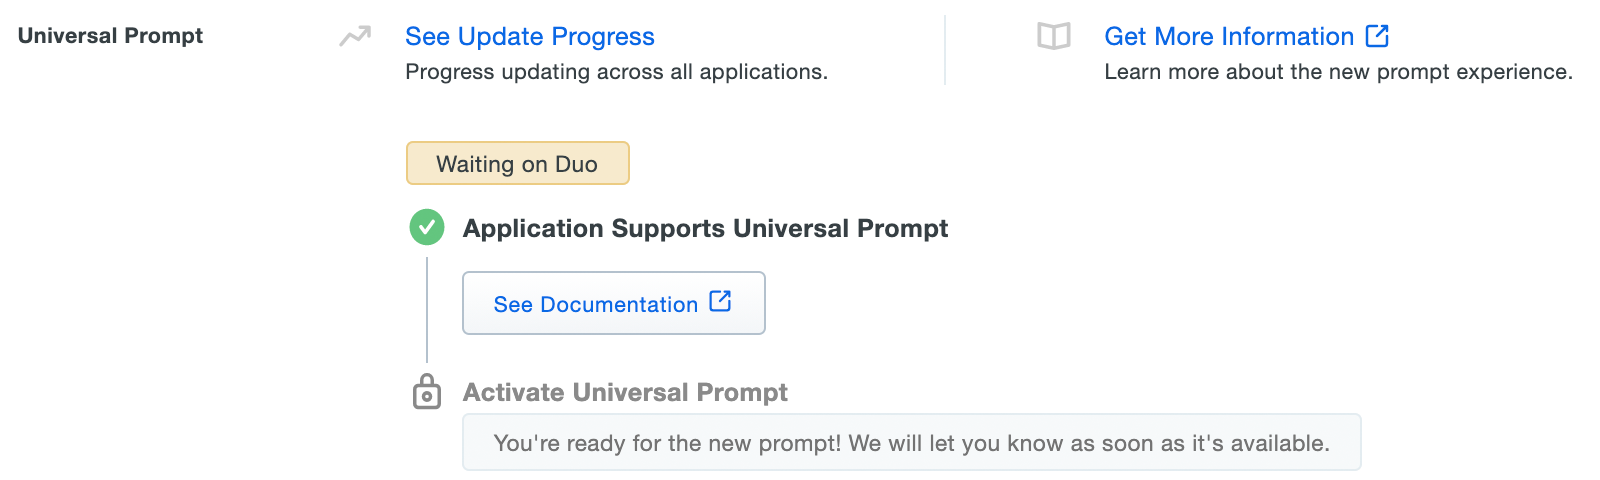 Universal Prompt Info - Duo Application Update Not Yet Available